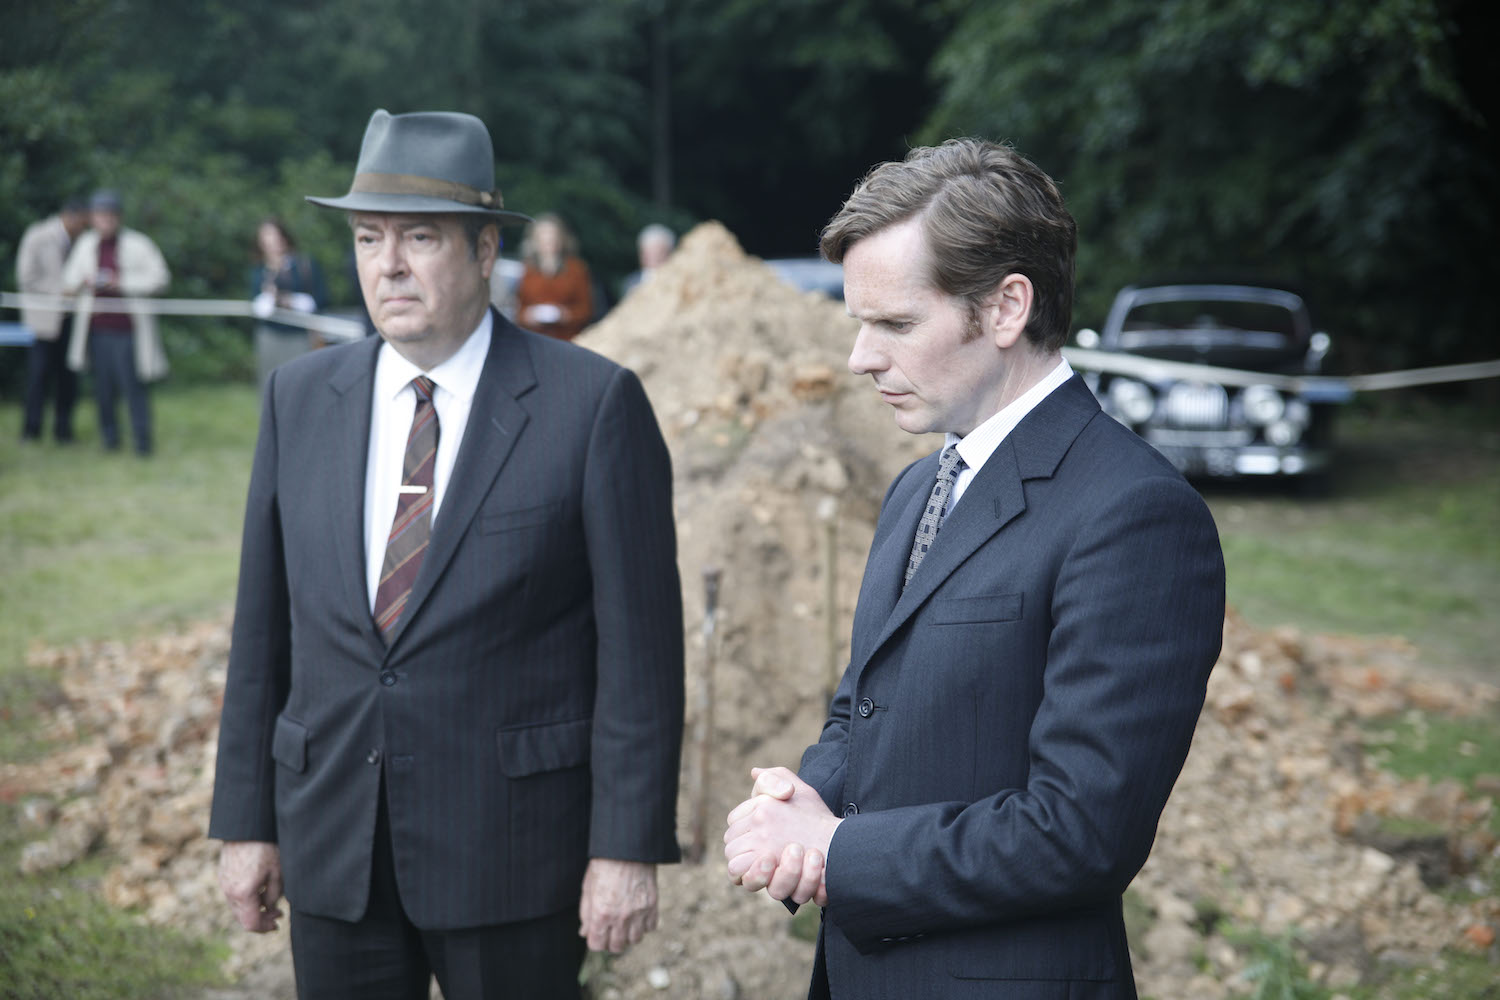 Picture shows: Fred Thursday (Roger Allam) and Morse (Sean Evans) at the excavation site in front of a large heap of dirt. In the background, journalists observe from behind a rope.